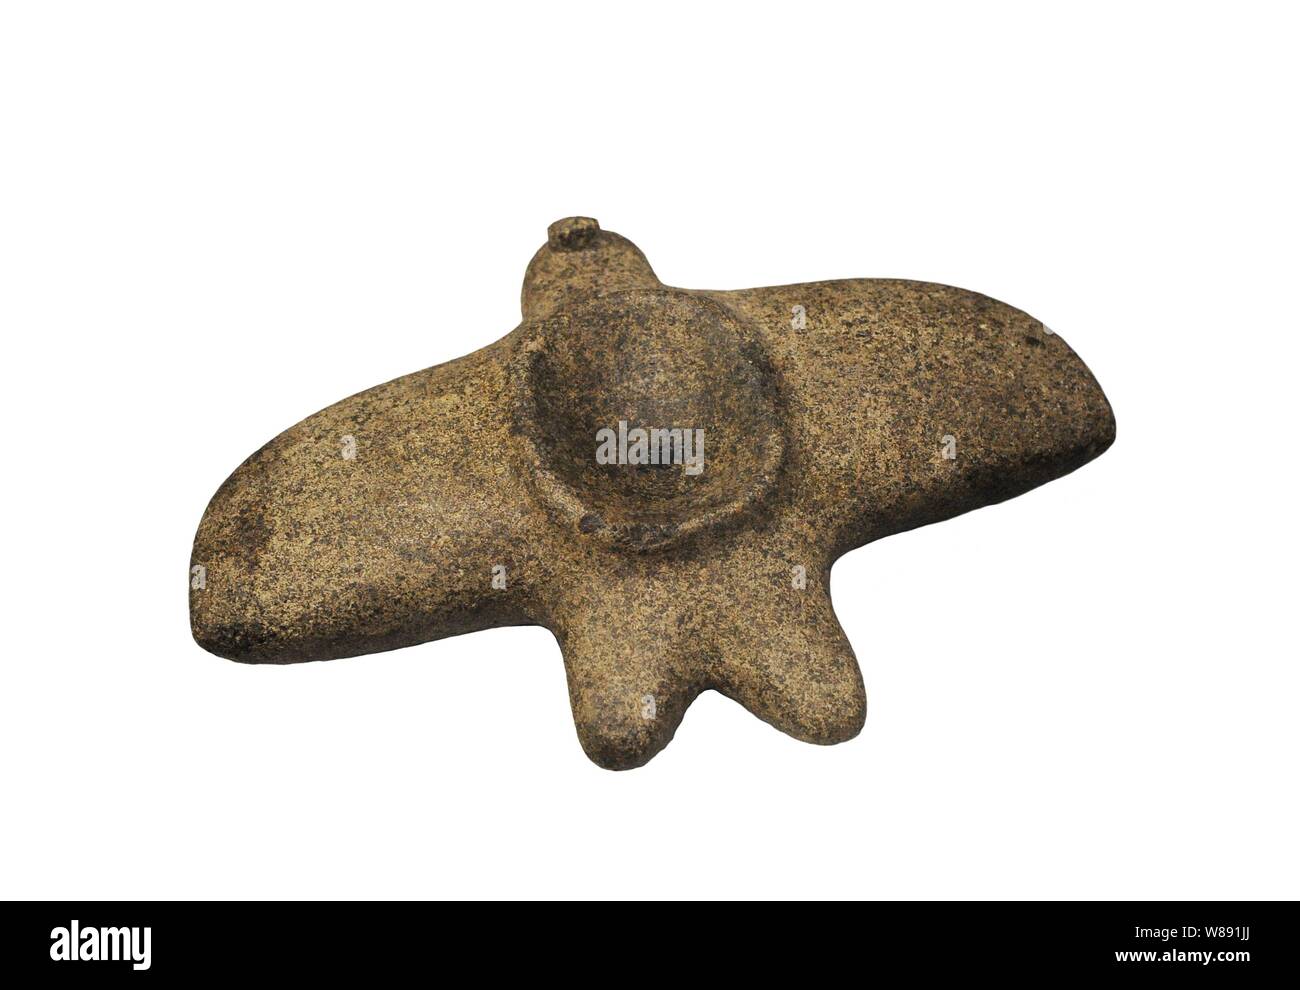 Bird shaped mortar. Zoolith used to grind hallucinogenic substances. It was collected in 1777 by Captain Geronimo Verde on Santa Catarina Island (Brazil). Sambaqui culture (3000 BC-500 AD). Stone. Coast of Brazil. Museum of the Americas. Madrid, Spain. Stock Photo